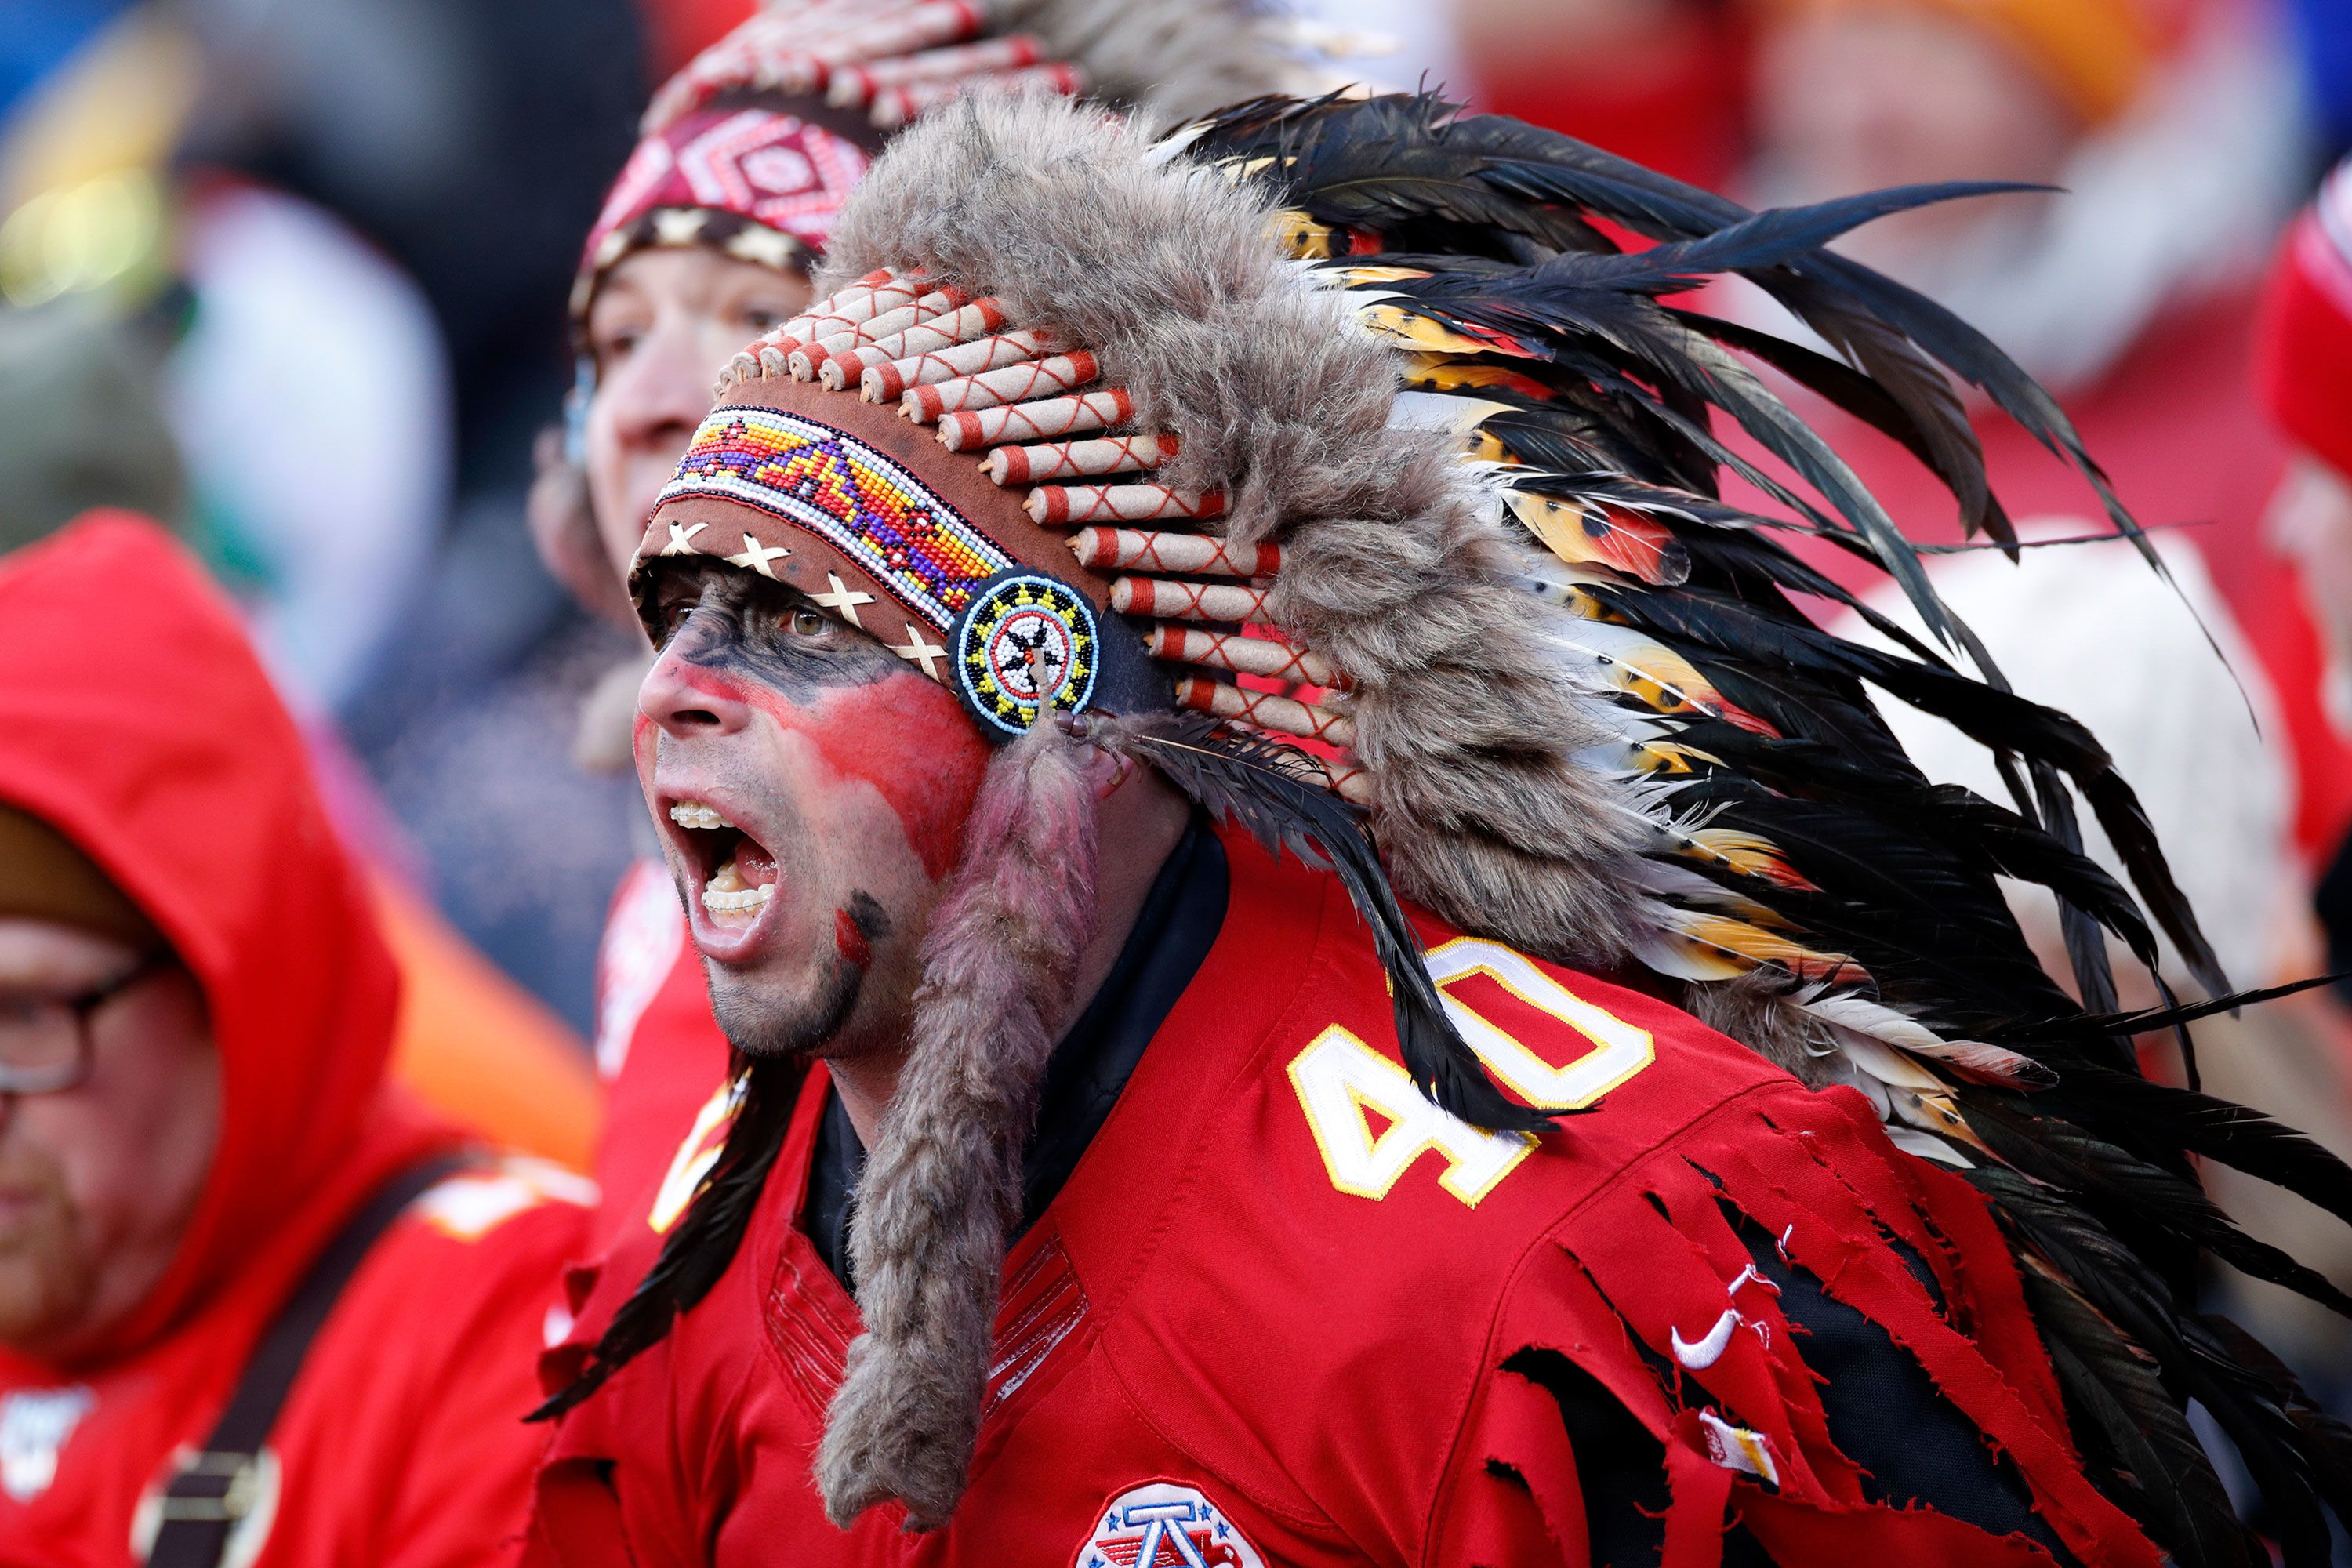 Native American-related teams faced pressure to change their names